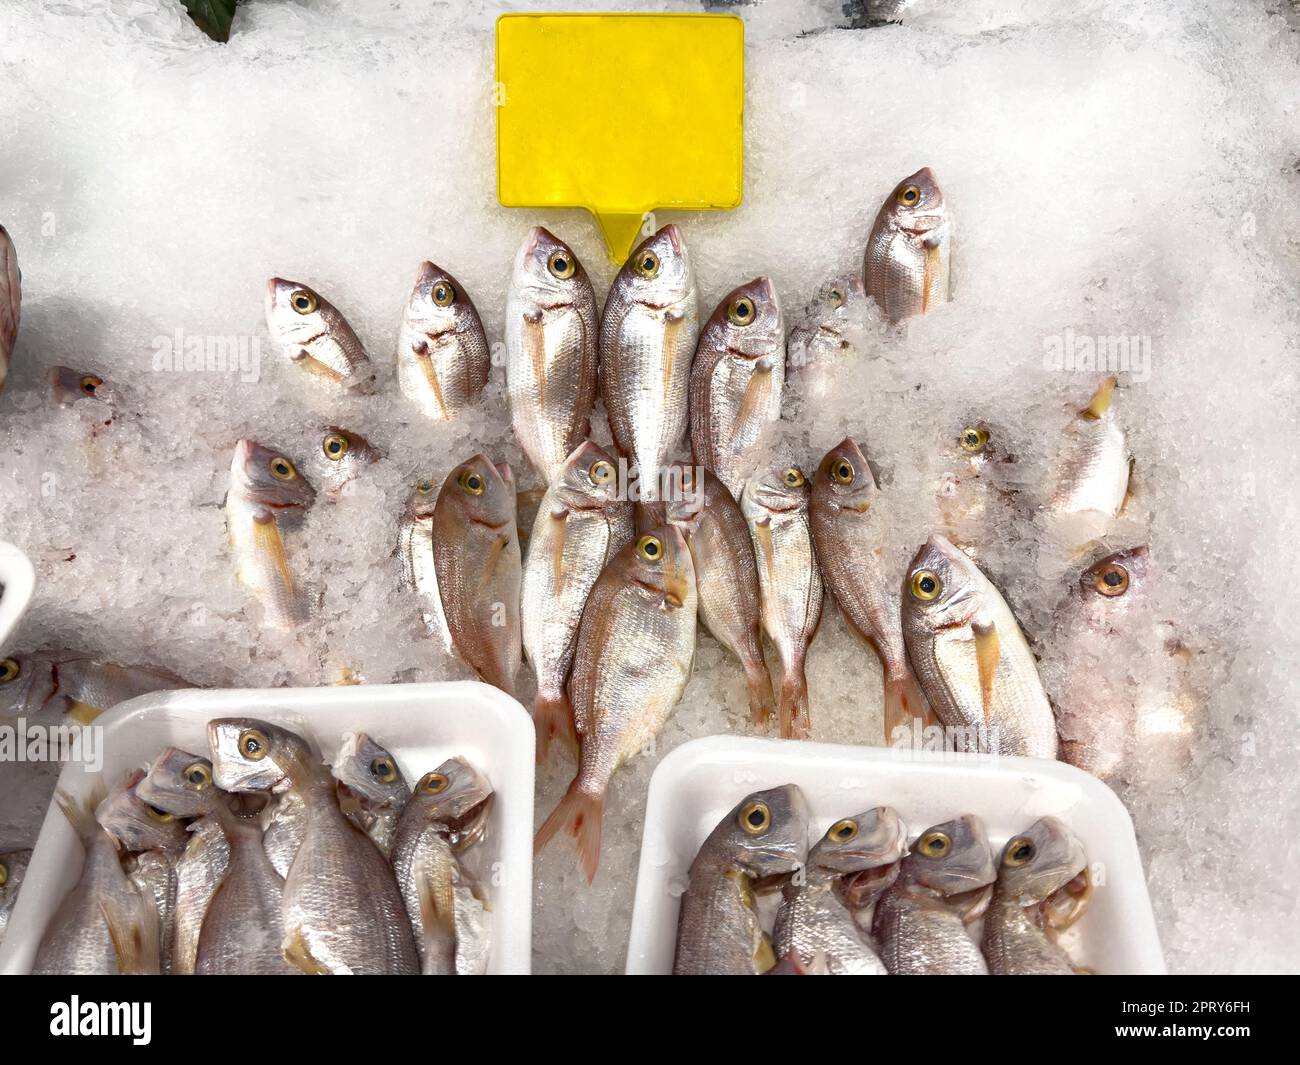 Red porgy fish. Fresh pagrus pagrus or red porgy fish in ice Stock Photo